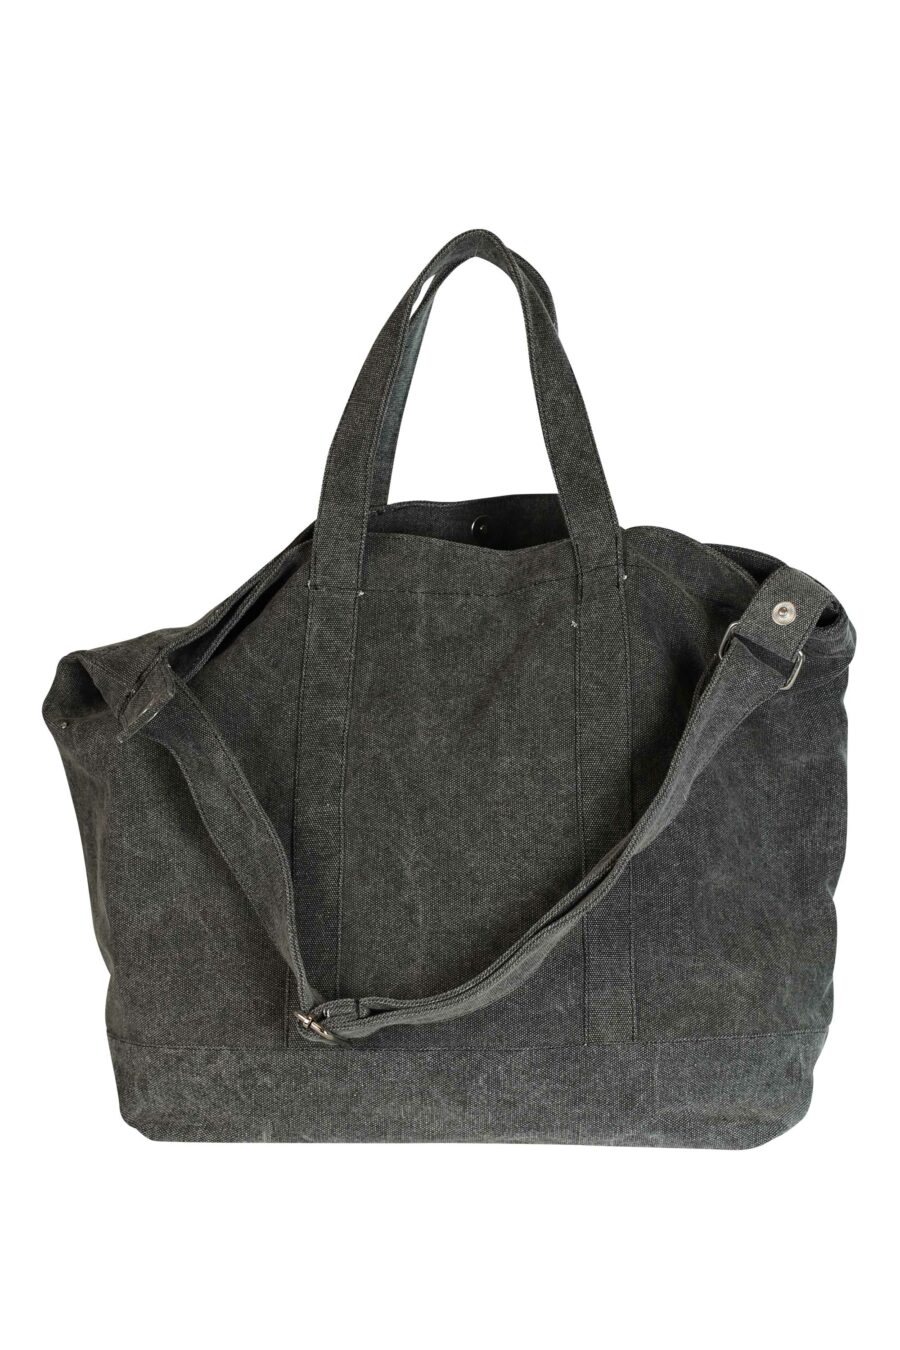 Extra large grey duffel bag with "rue st guillaume" logo - 8720744102335 3